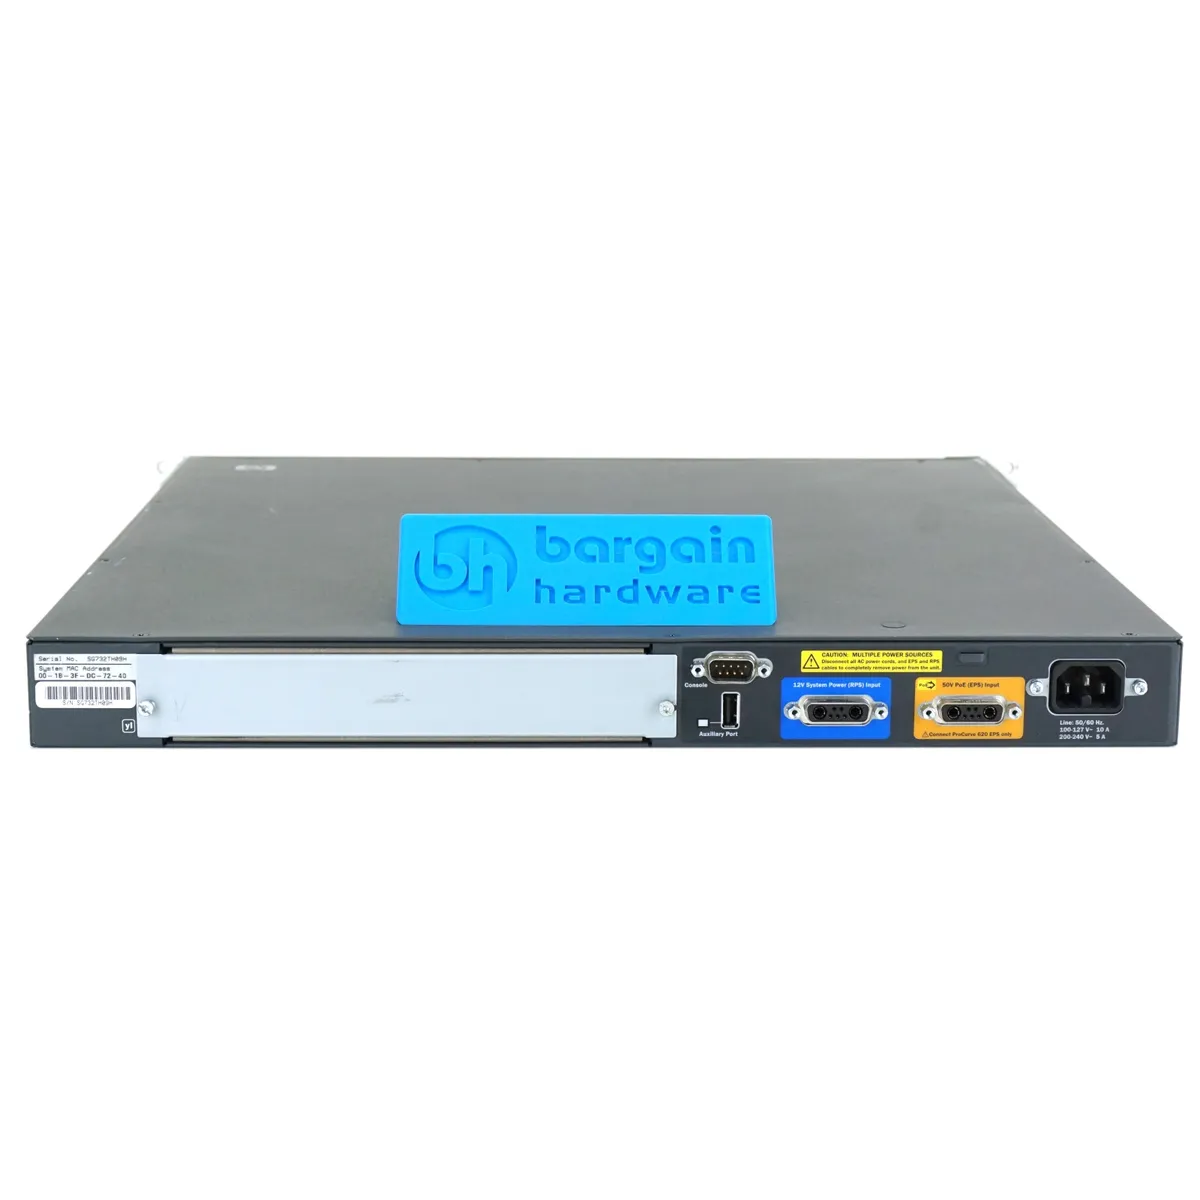 HP (J8693A) Pro-Curve 3500YL-48G-PoE - 48 RJ-45 Port PoE Switch - With Ears